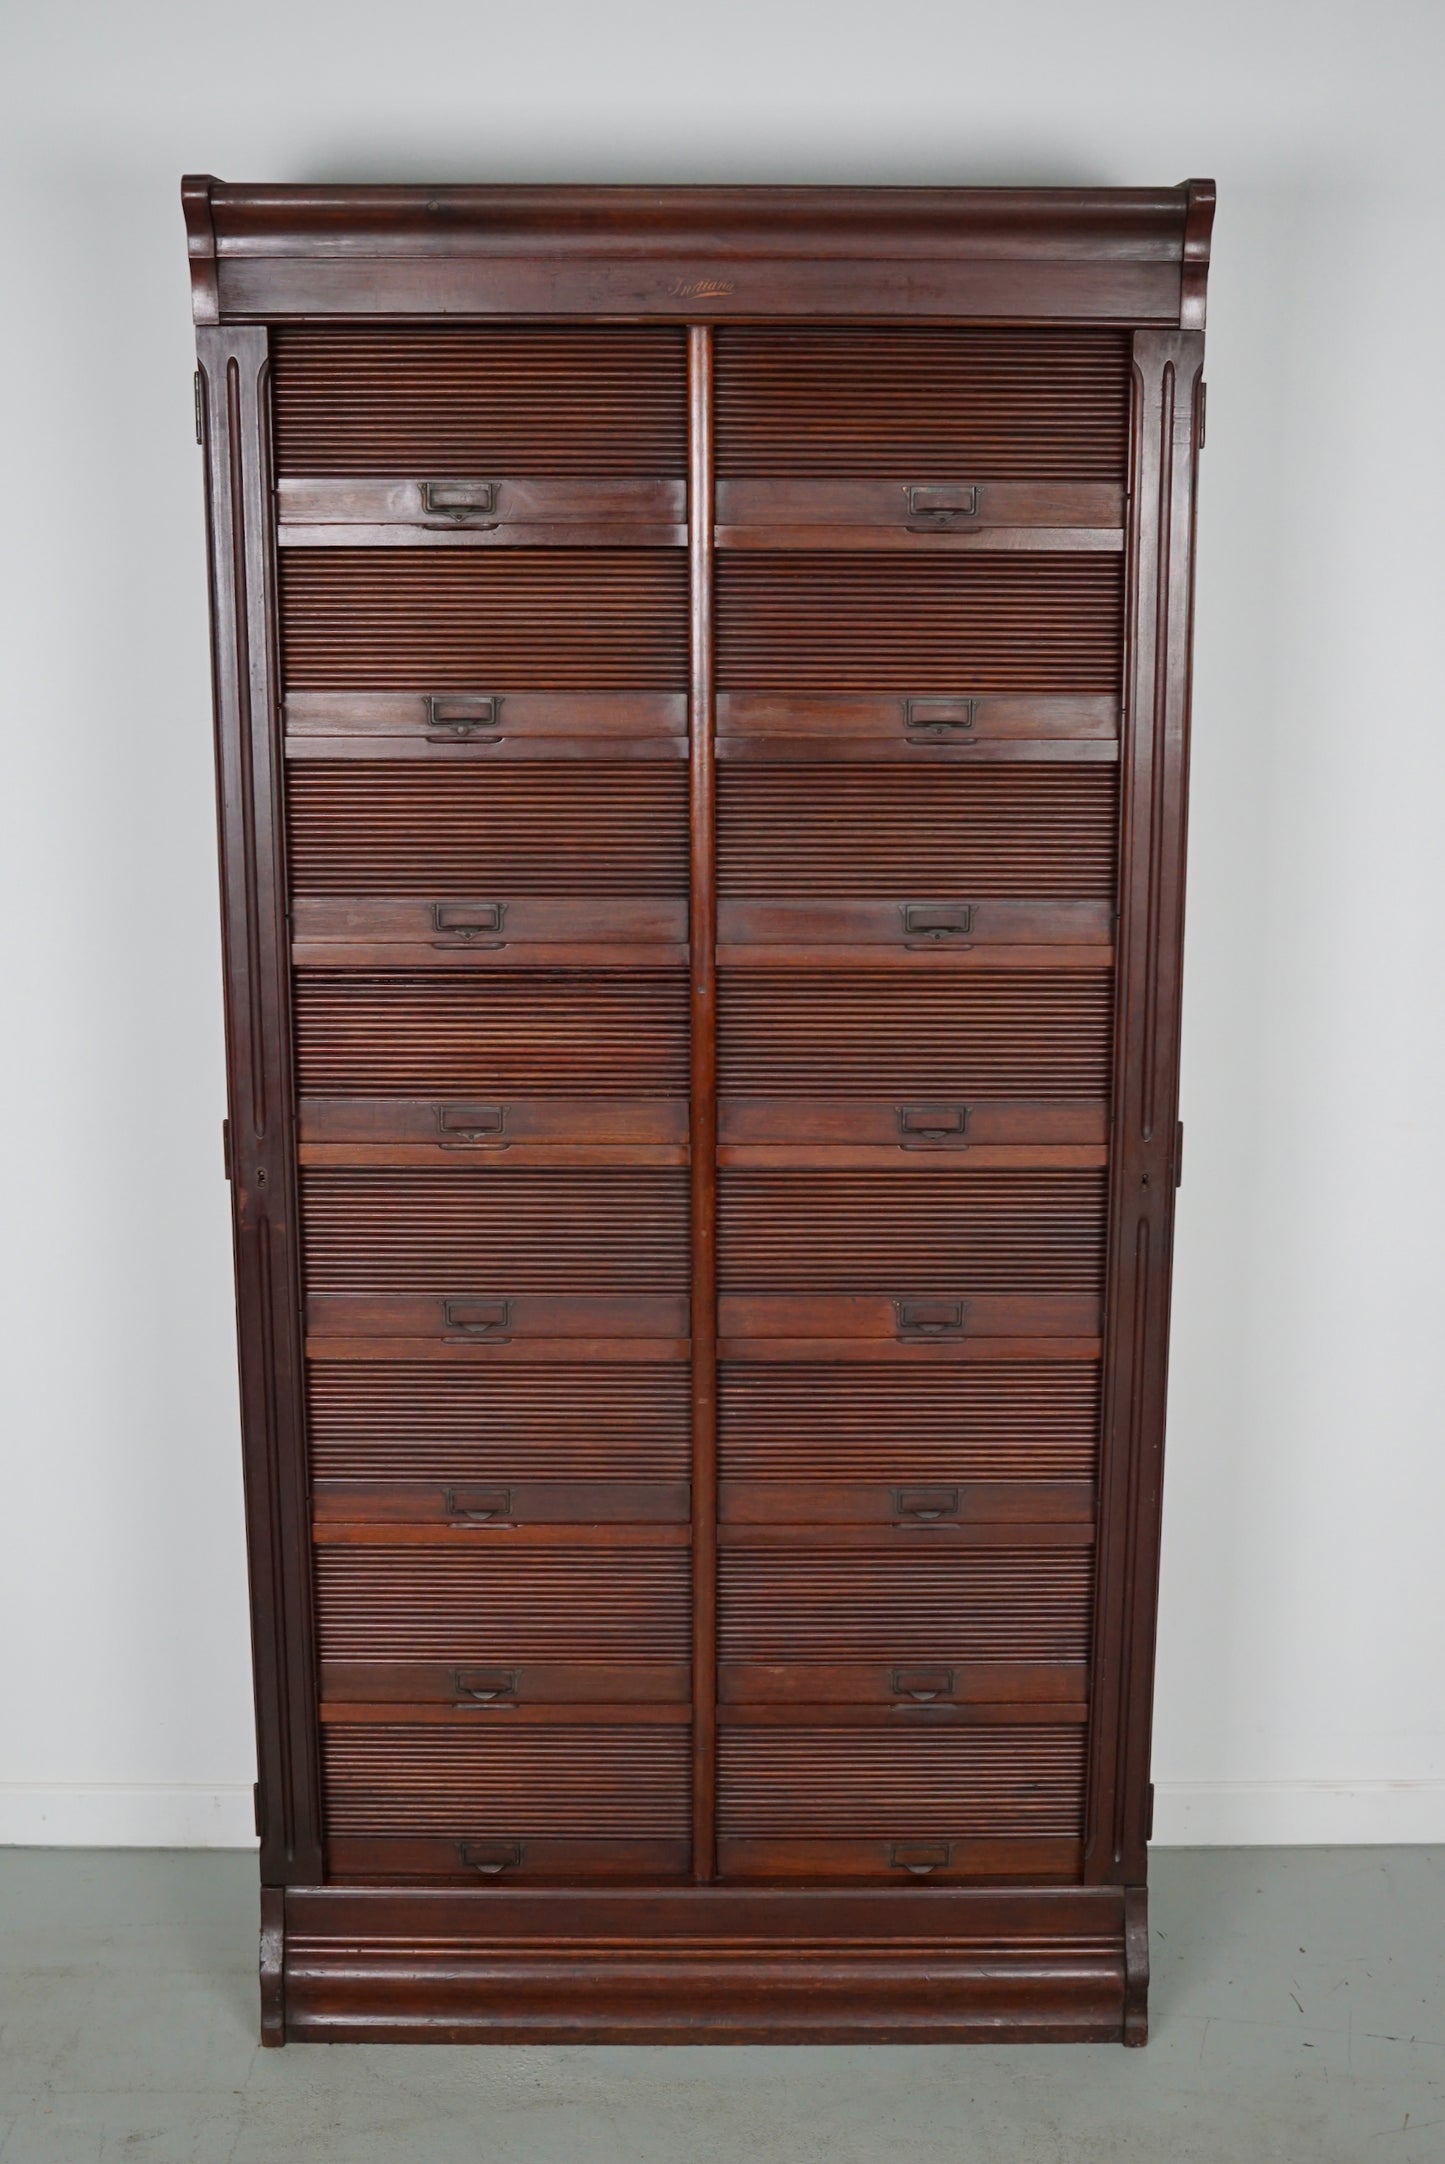 Antique Mahogany Filing Cabinet with Roll Down Tambour Doors, USA circa 1920